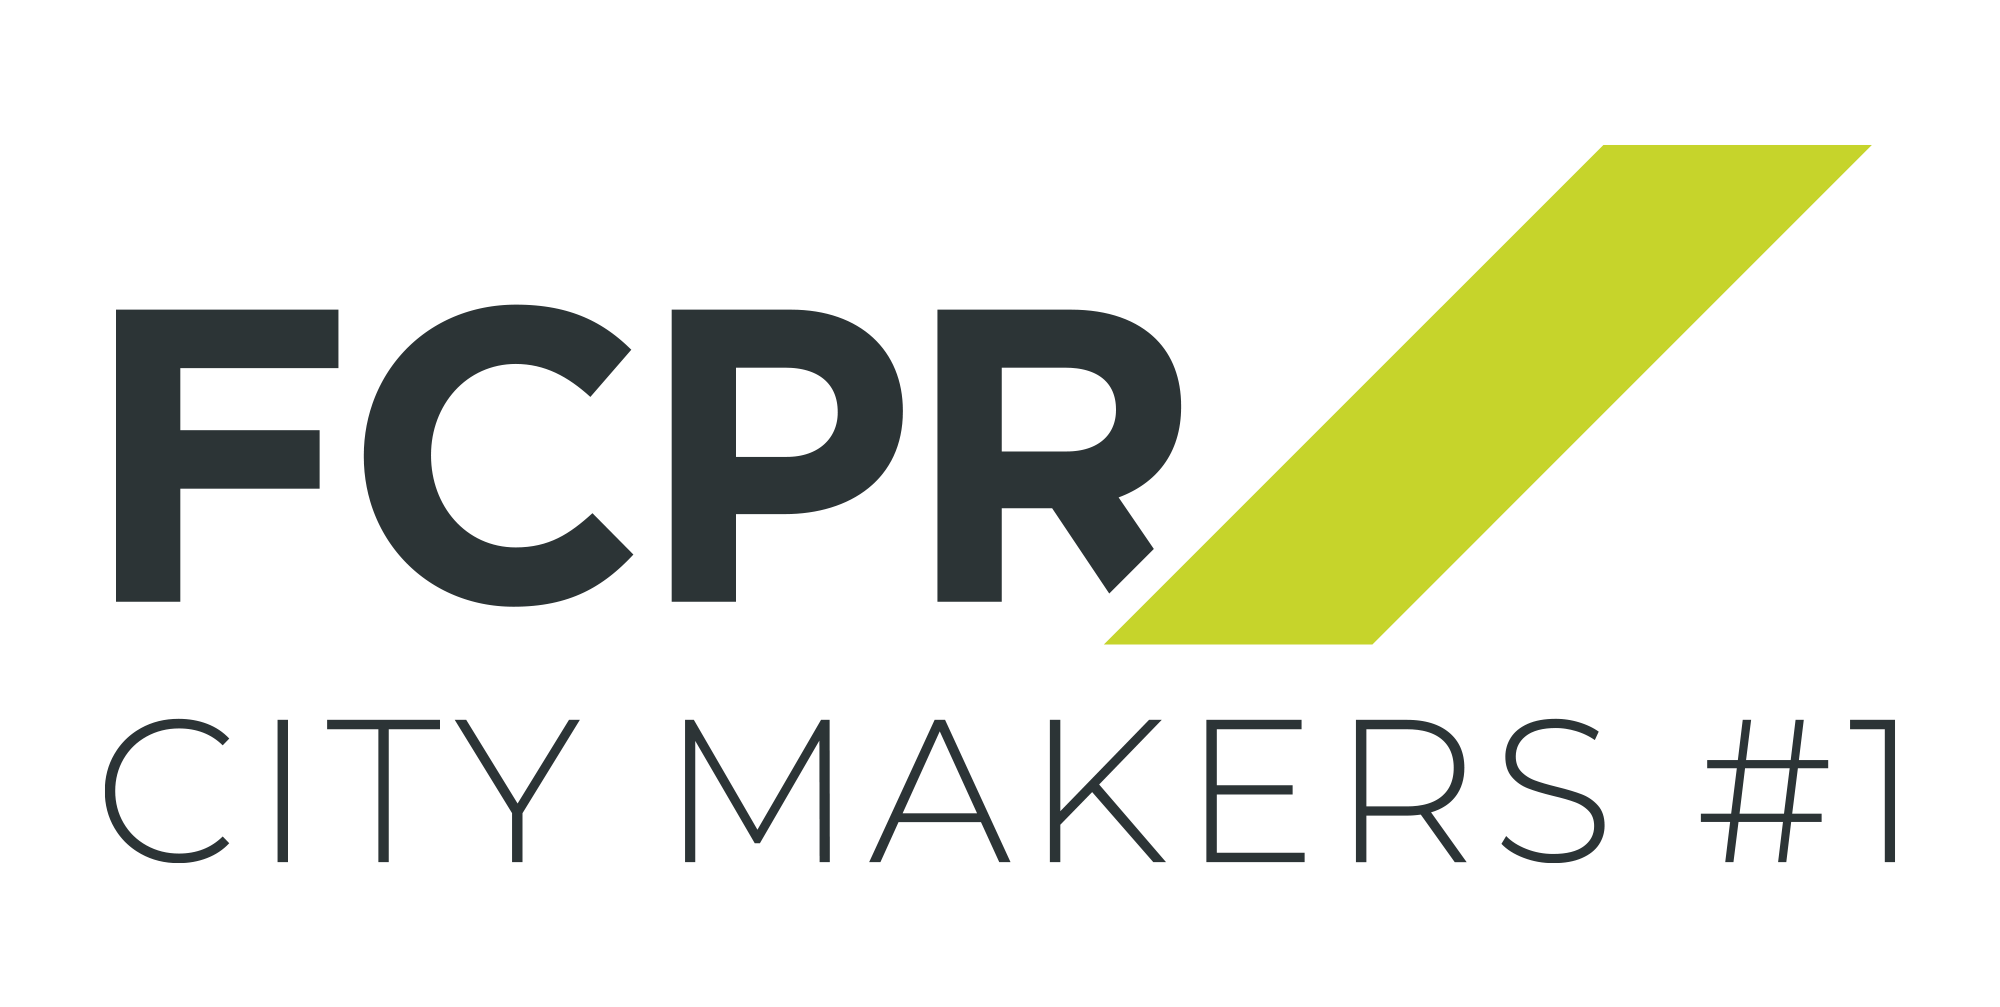 FCPR City Makers #1